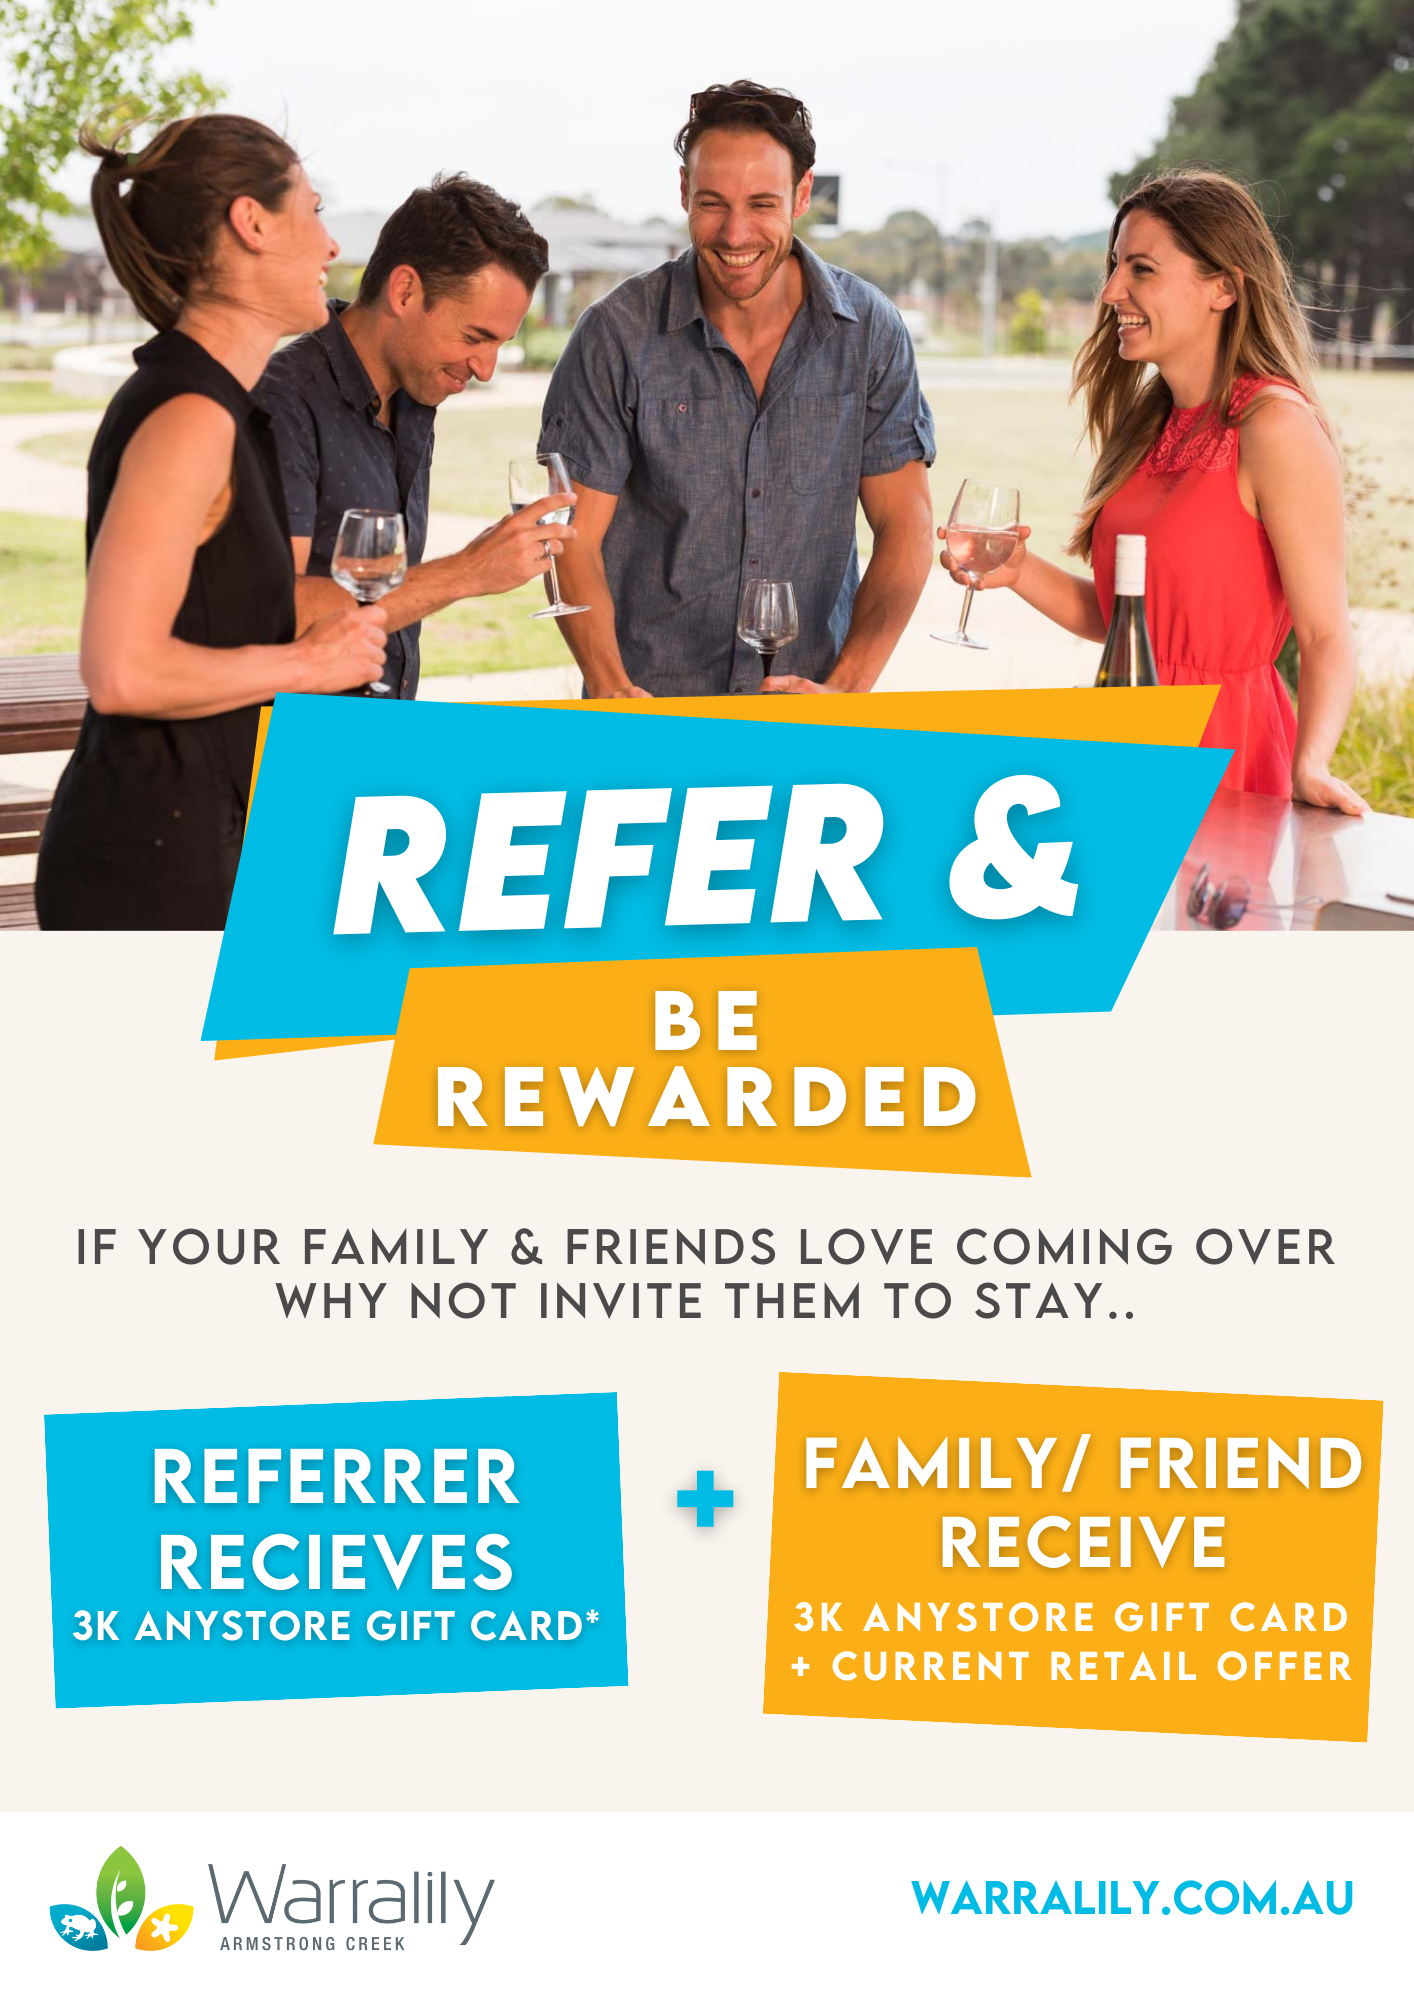 Refer and be rewarded